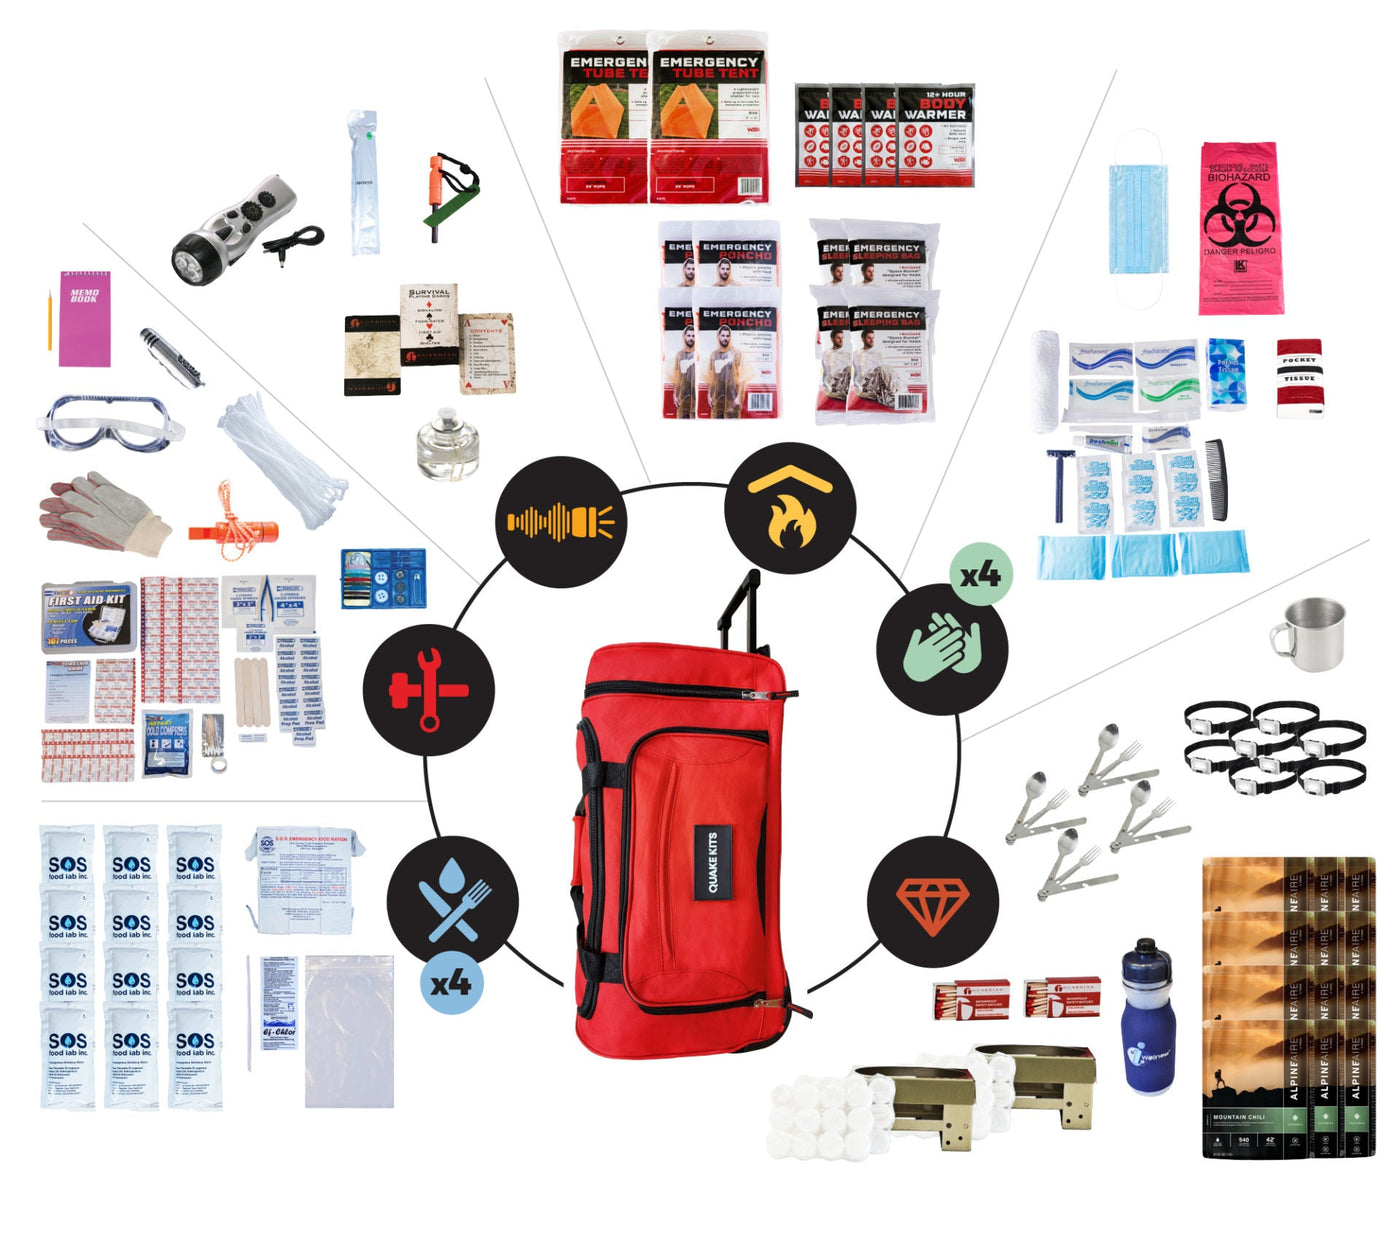 Extensively Prepared Emergency Kit - 4 Person / 72 Hours